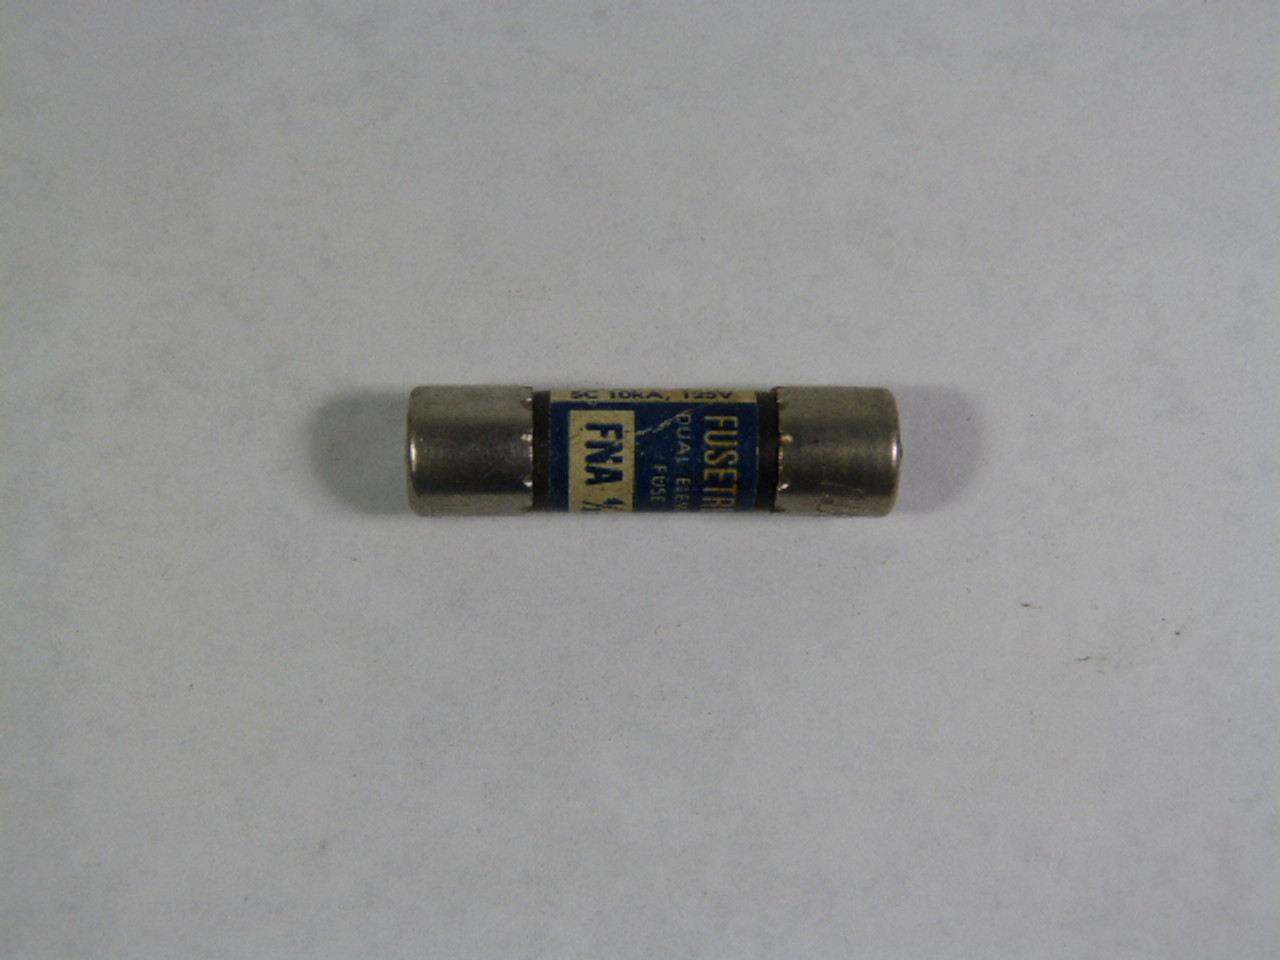 Fusetron FNA-4/10 Slow Blow Fuse 4/10A 250V USED